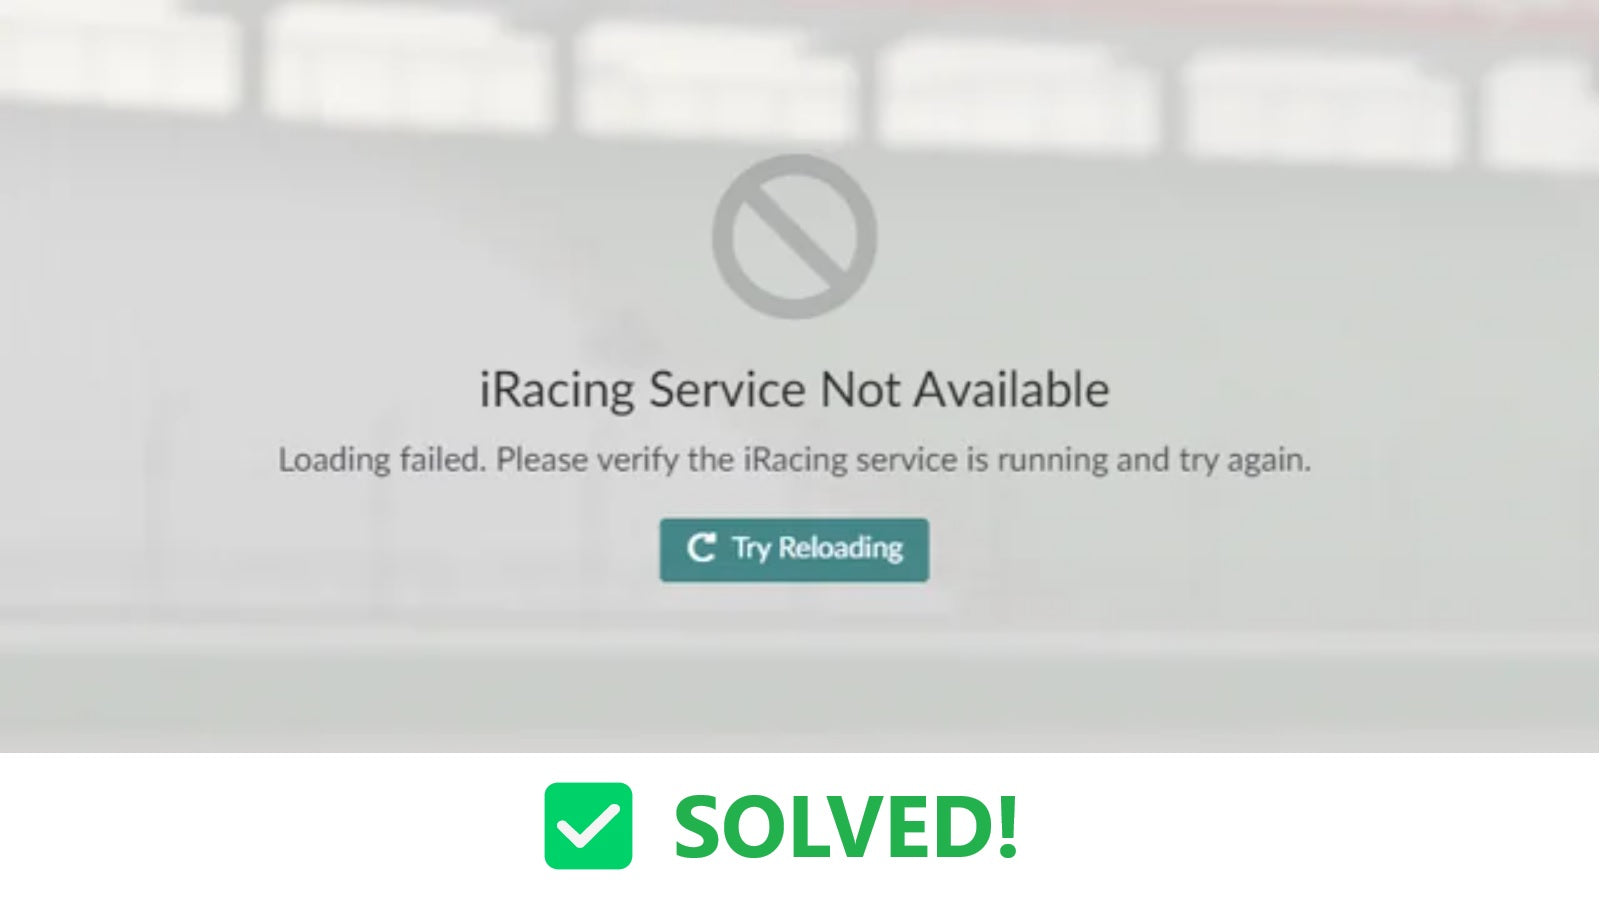 iRacing Service Not Available Error